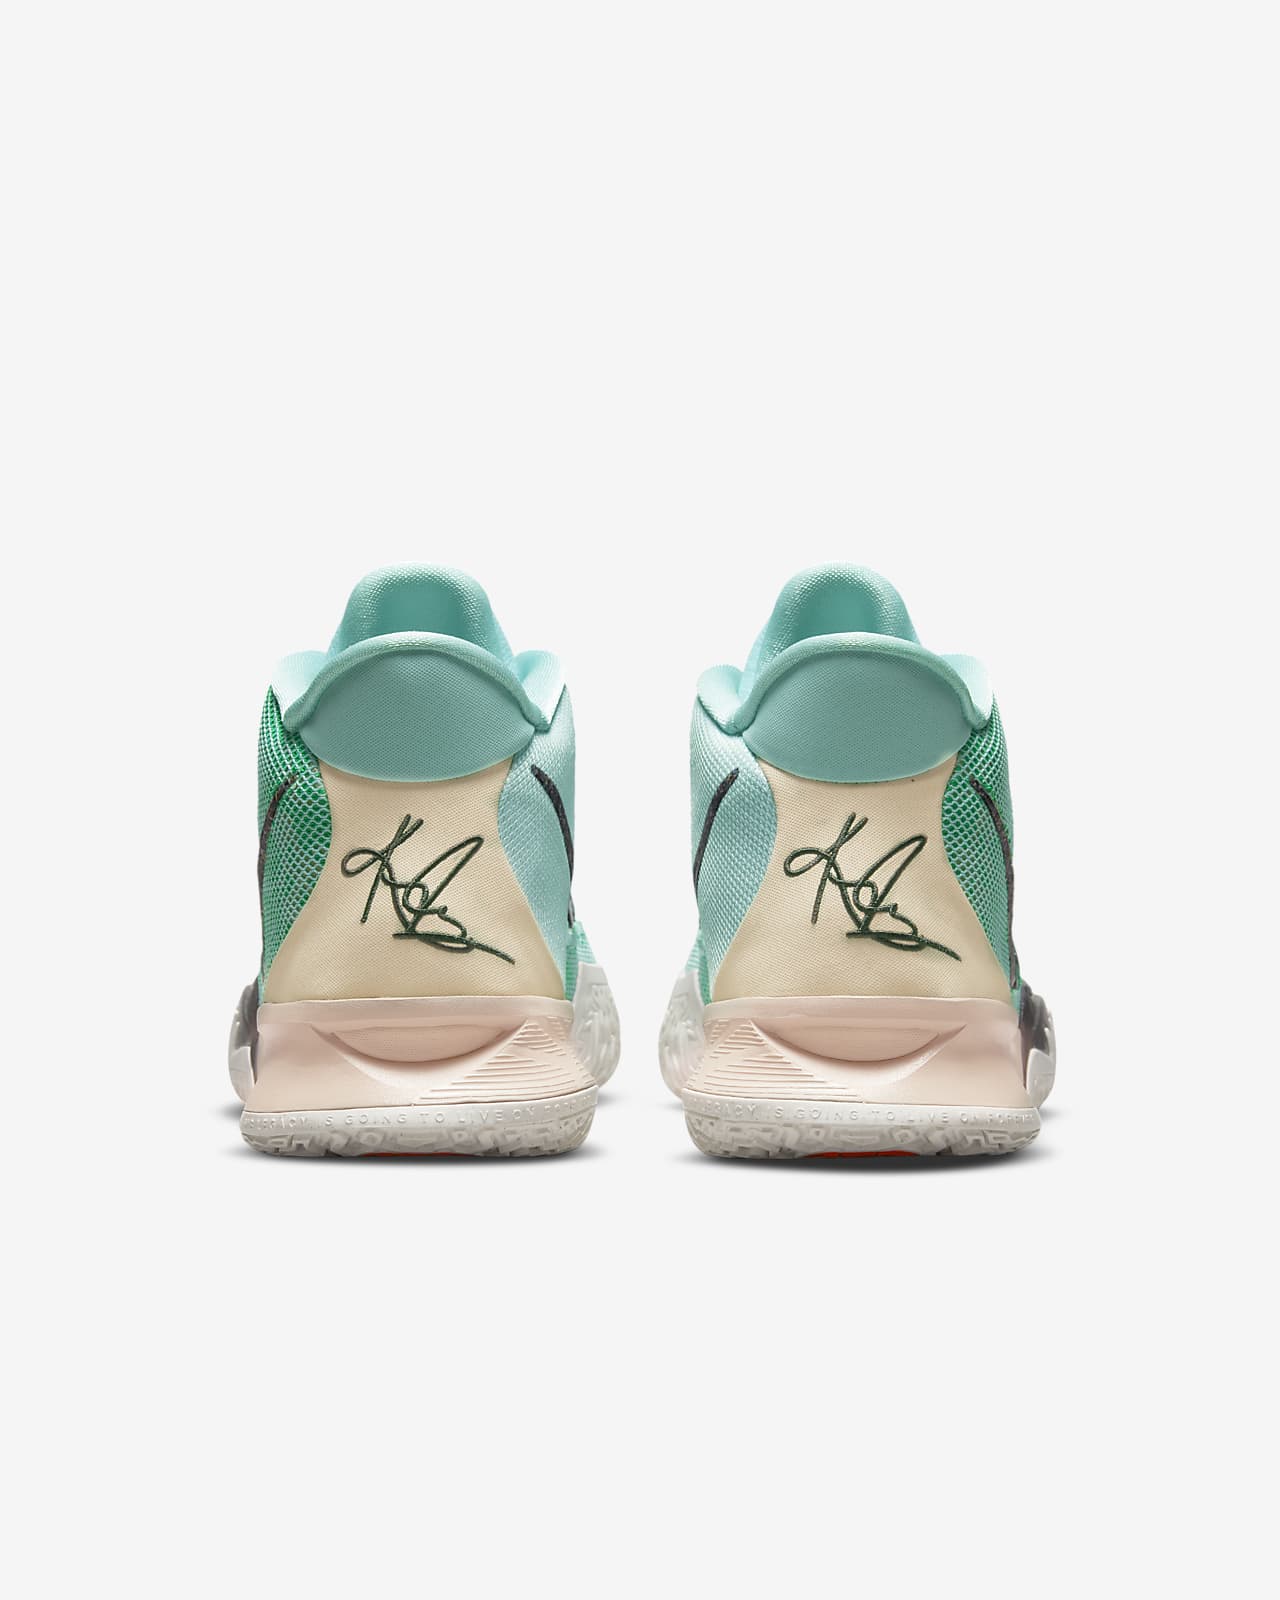 kyrie irving nike signature shoes